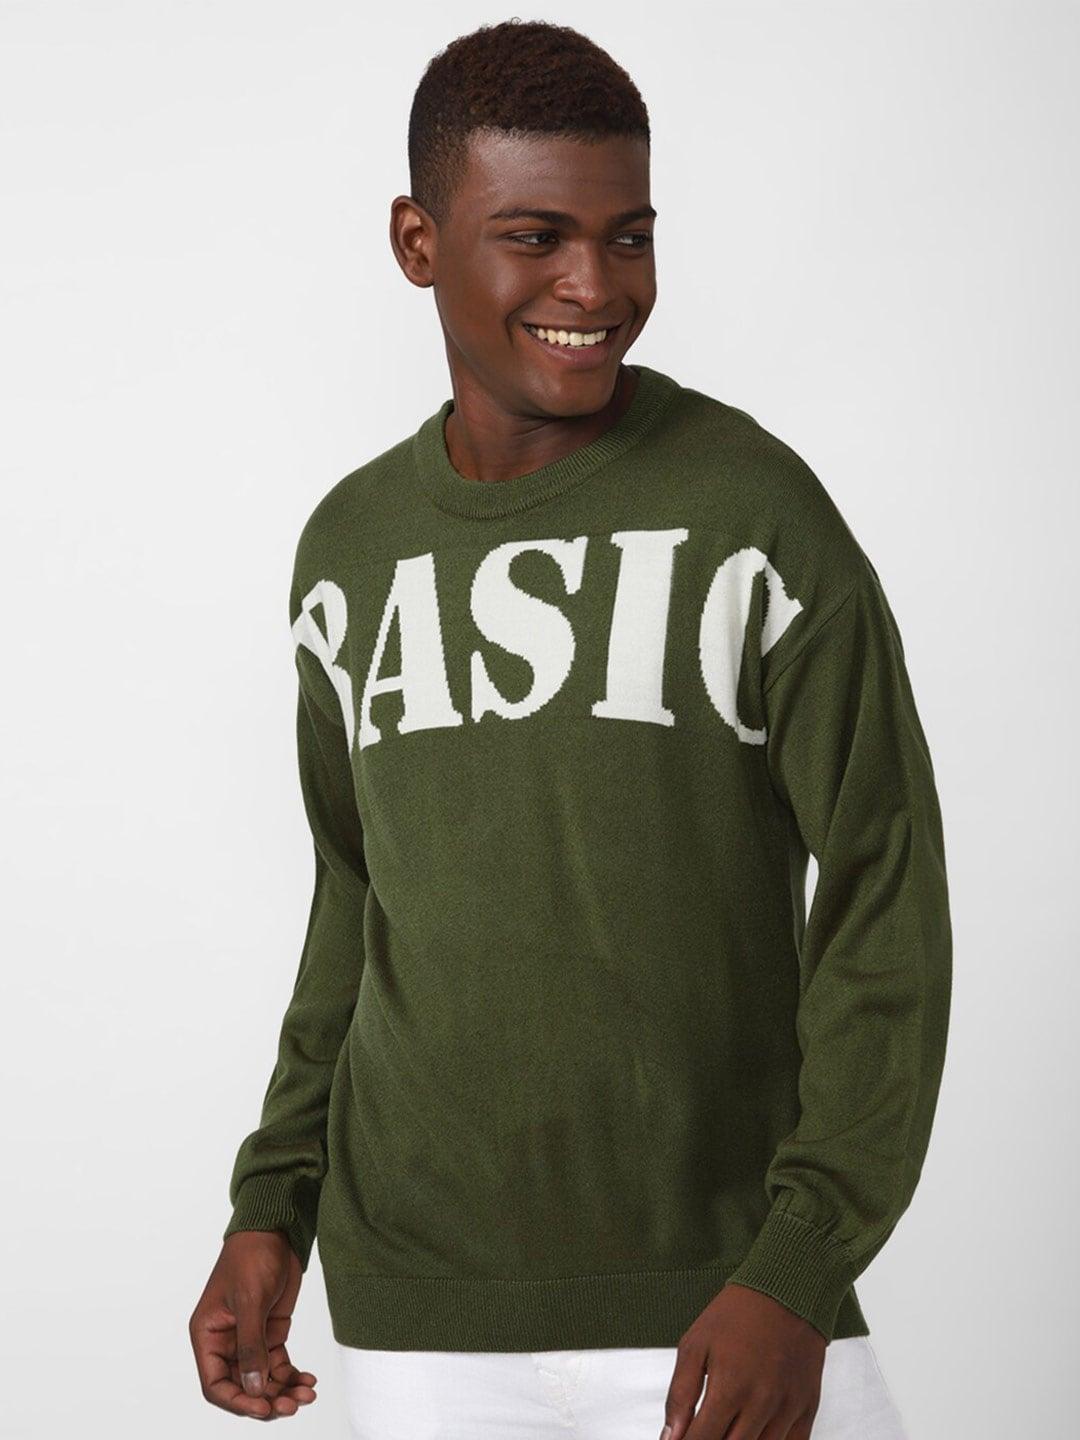 forever-21-men-olive-green-&-white-typography-printed-pullover